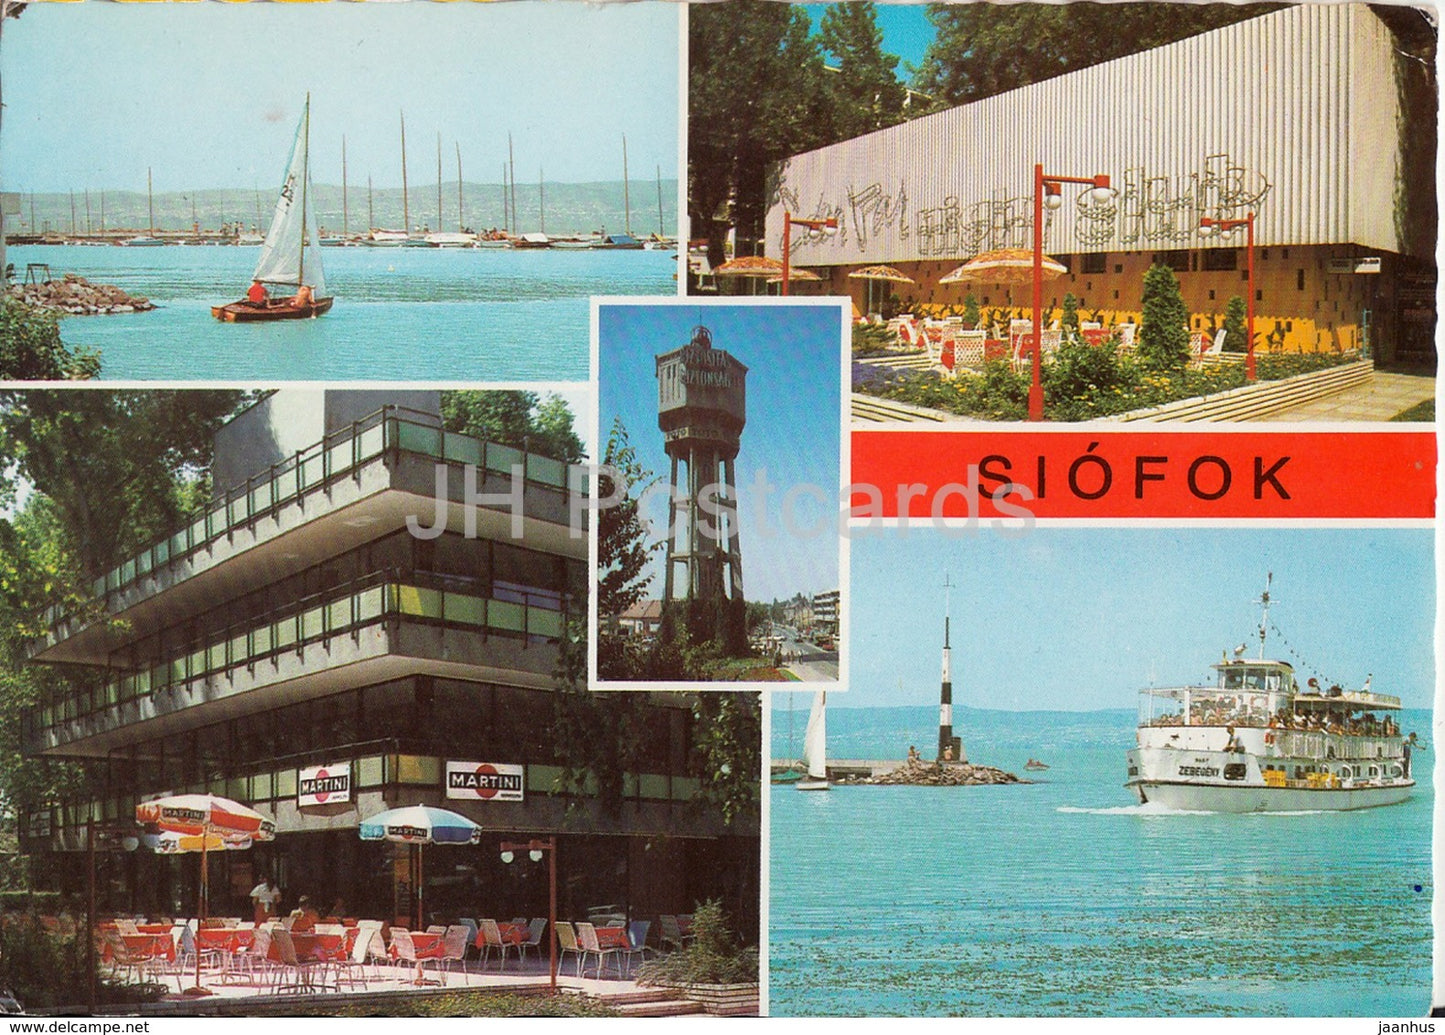 Siofok - sailing boat - hotel - passenger boat - lighthouse - multiview - 1982 - Hungary - used - JH Postcards